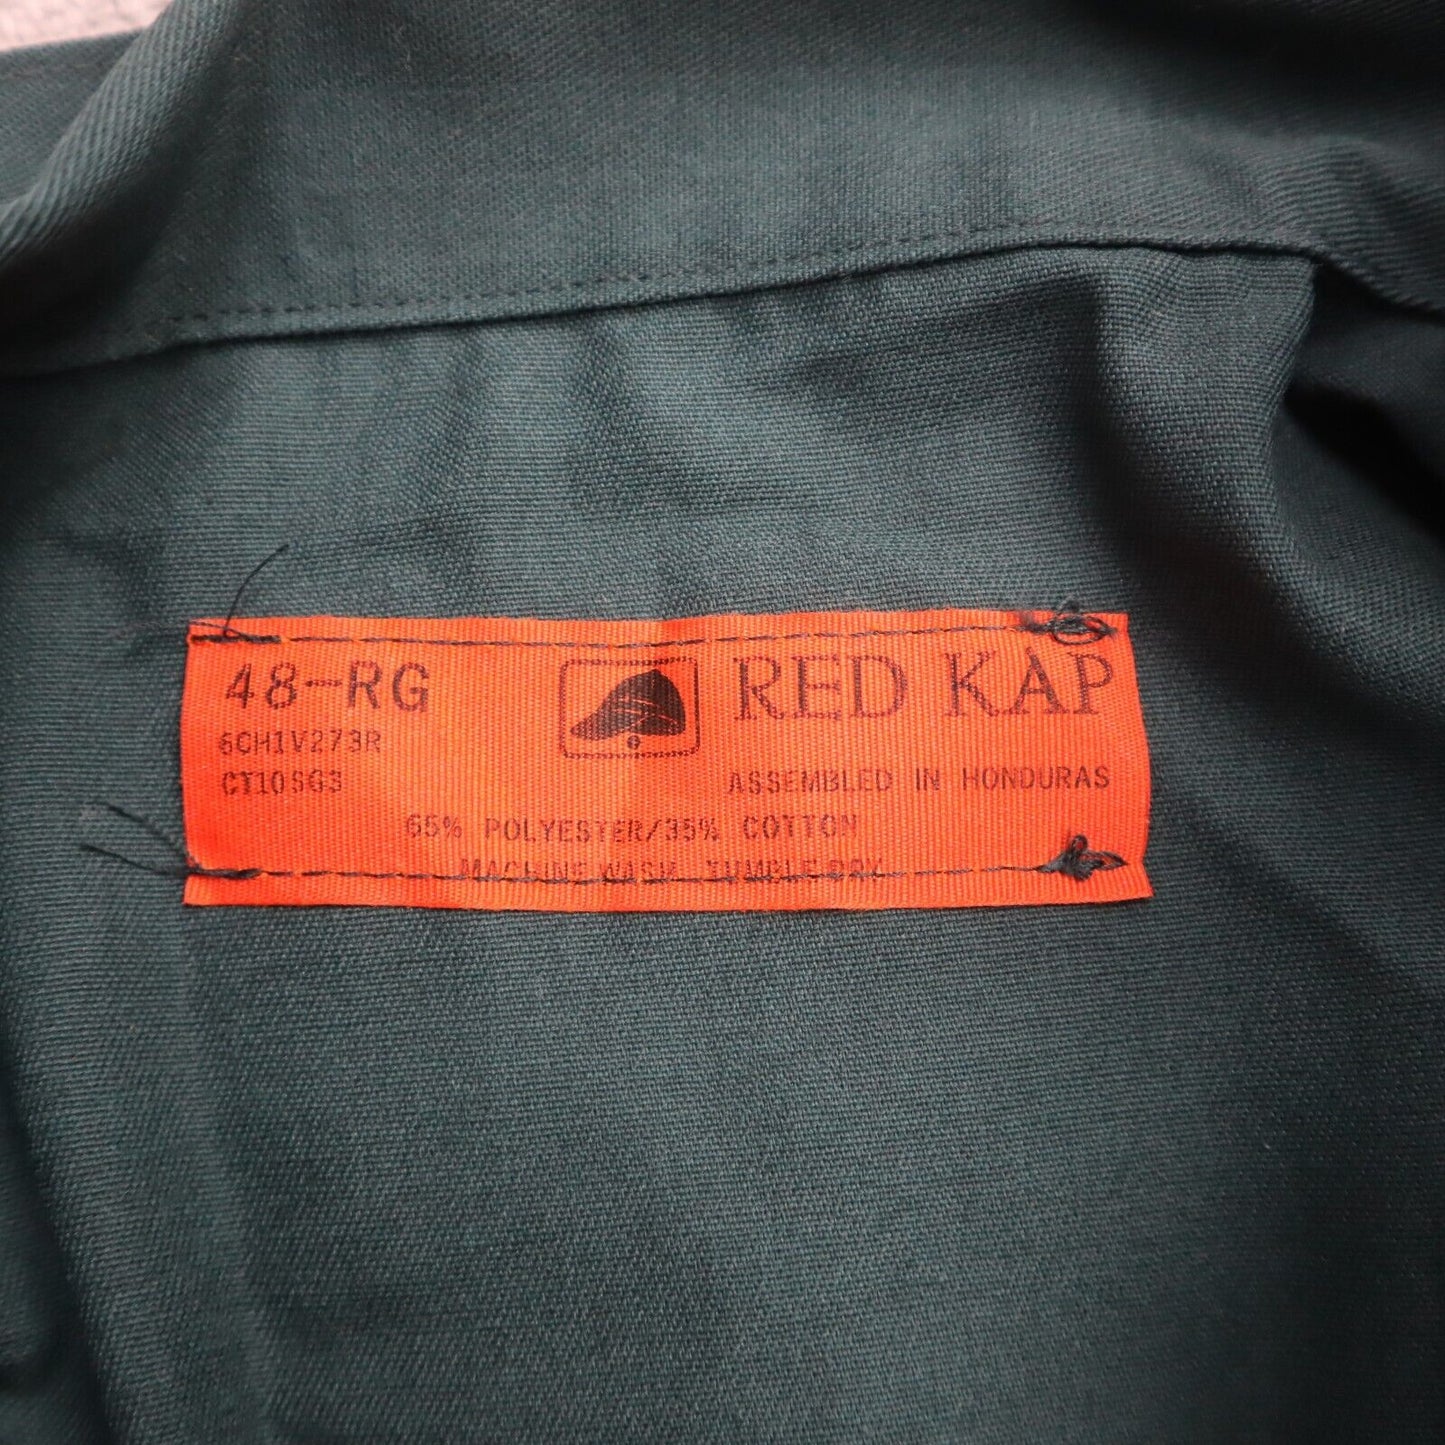 Red Kap Mens Insulated Coverall Jumpsuit Long Sleeve Teal Green Size 48 Regular